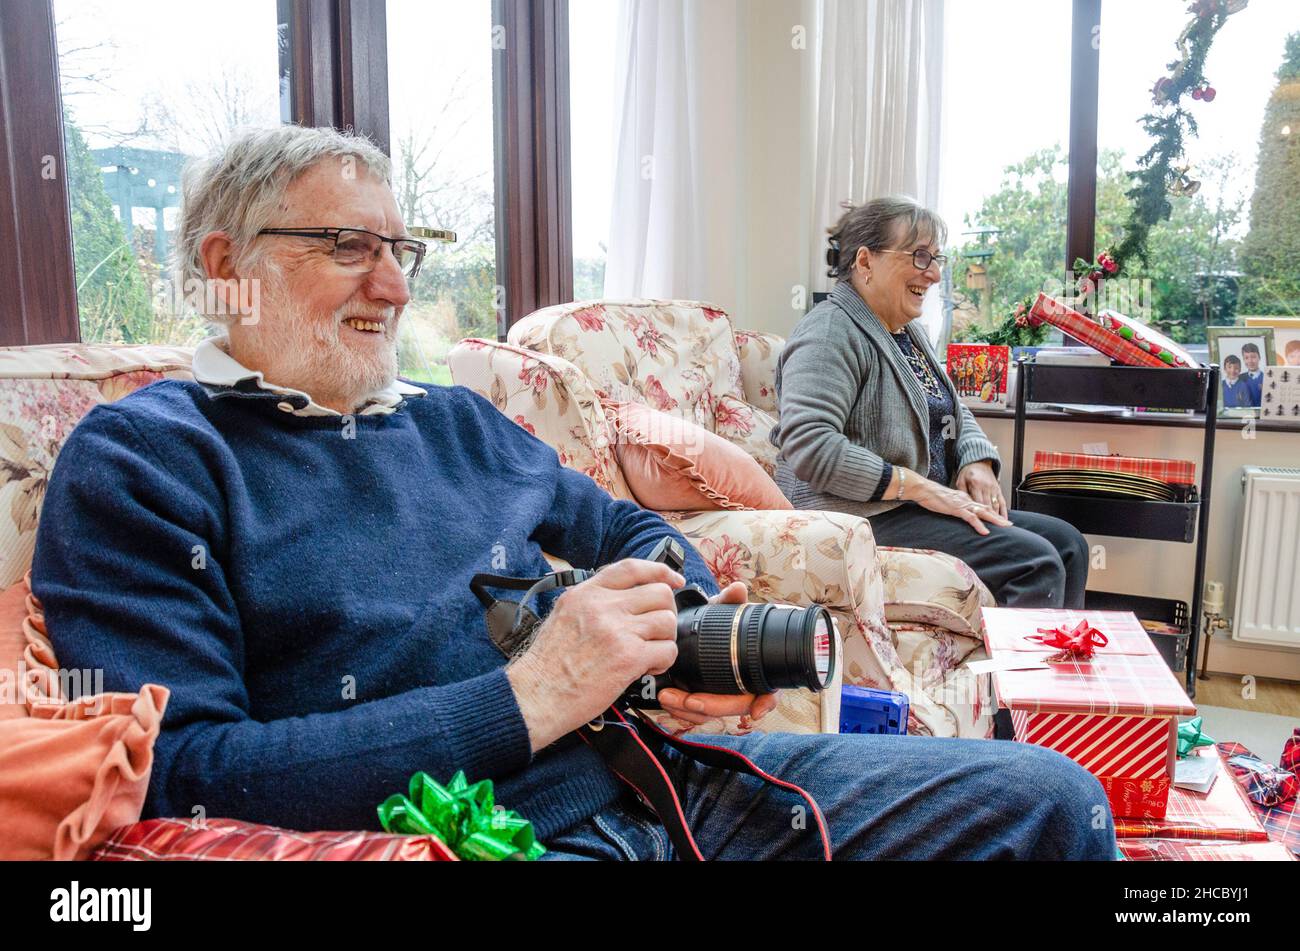 A retired couple sit in armchairs on Christmas morning with presents to open but watch happily as family our of shot open presents first. Stock Photo